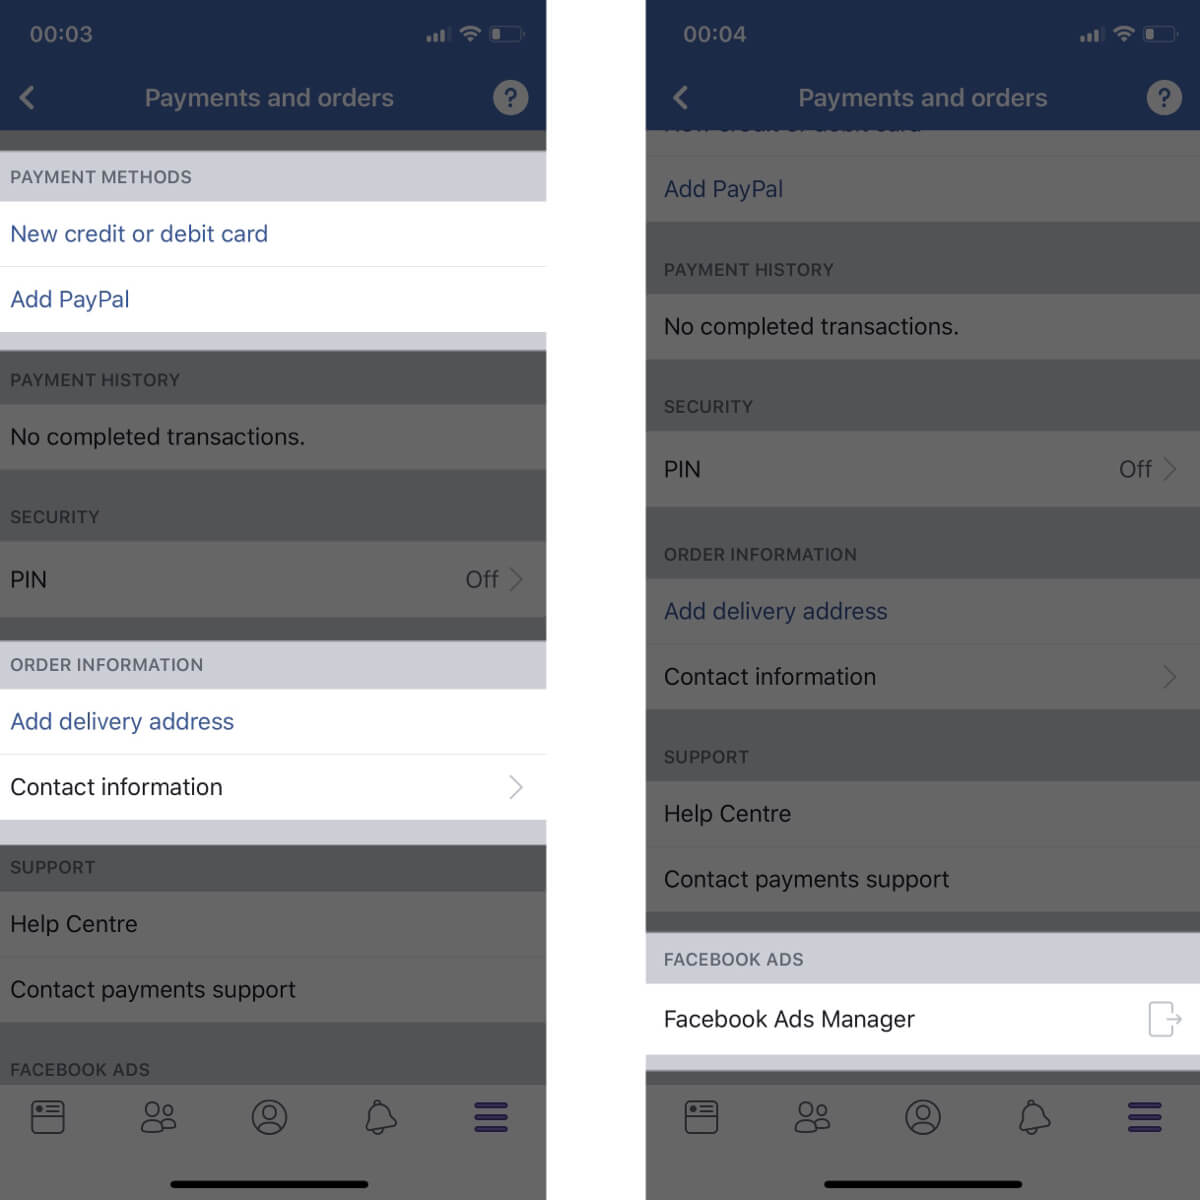 Screenshots showing the specific payment settings you should change to keep your data safe on Facebook.